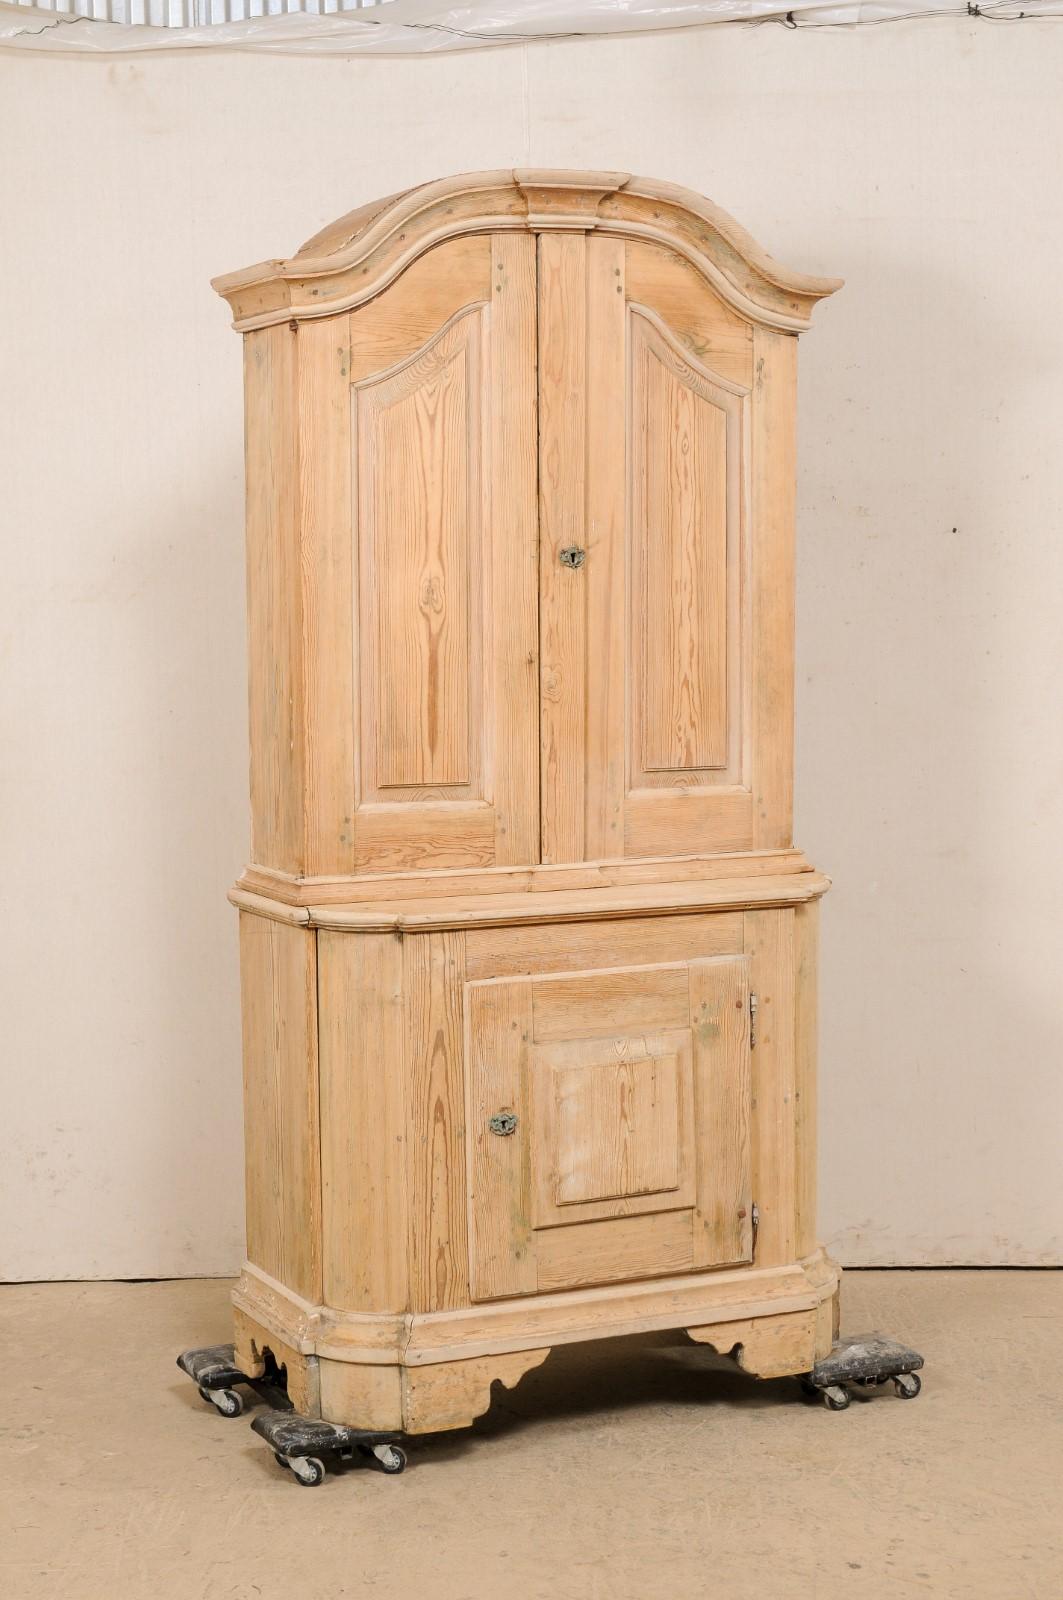 A Swedish period Rococo painted wood tall cabinet from the 18th century. This antique cabinet from Sweden is crowned by a gracefully arched pediment cornice at top, has beautifully carved raised panel doors, and is presented upon curvy-carved